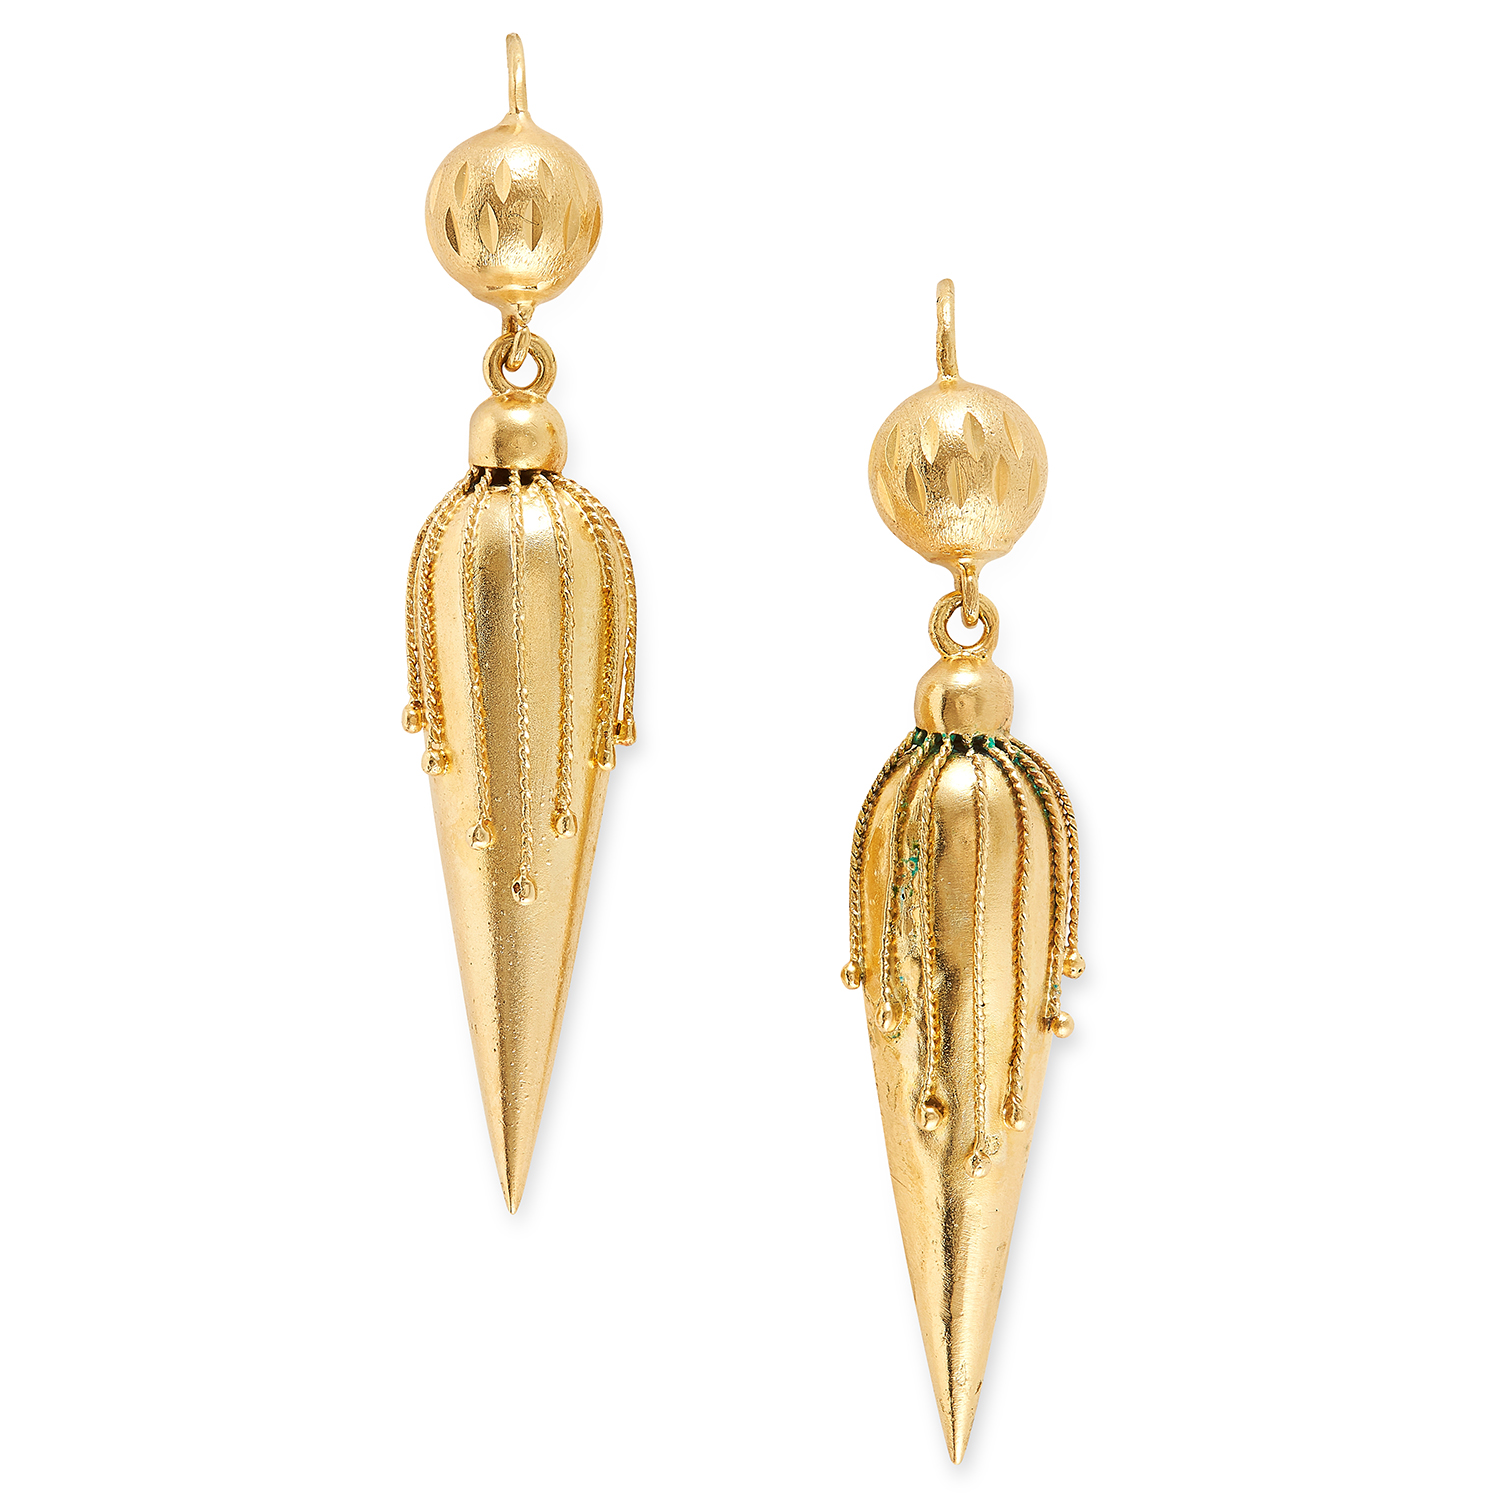 ANTIQUE ETRUSCAN REVIVAL STYLE EARRINGS set with a gold drop, 5cm, 3.4g.